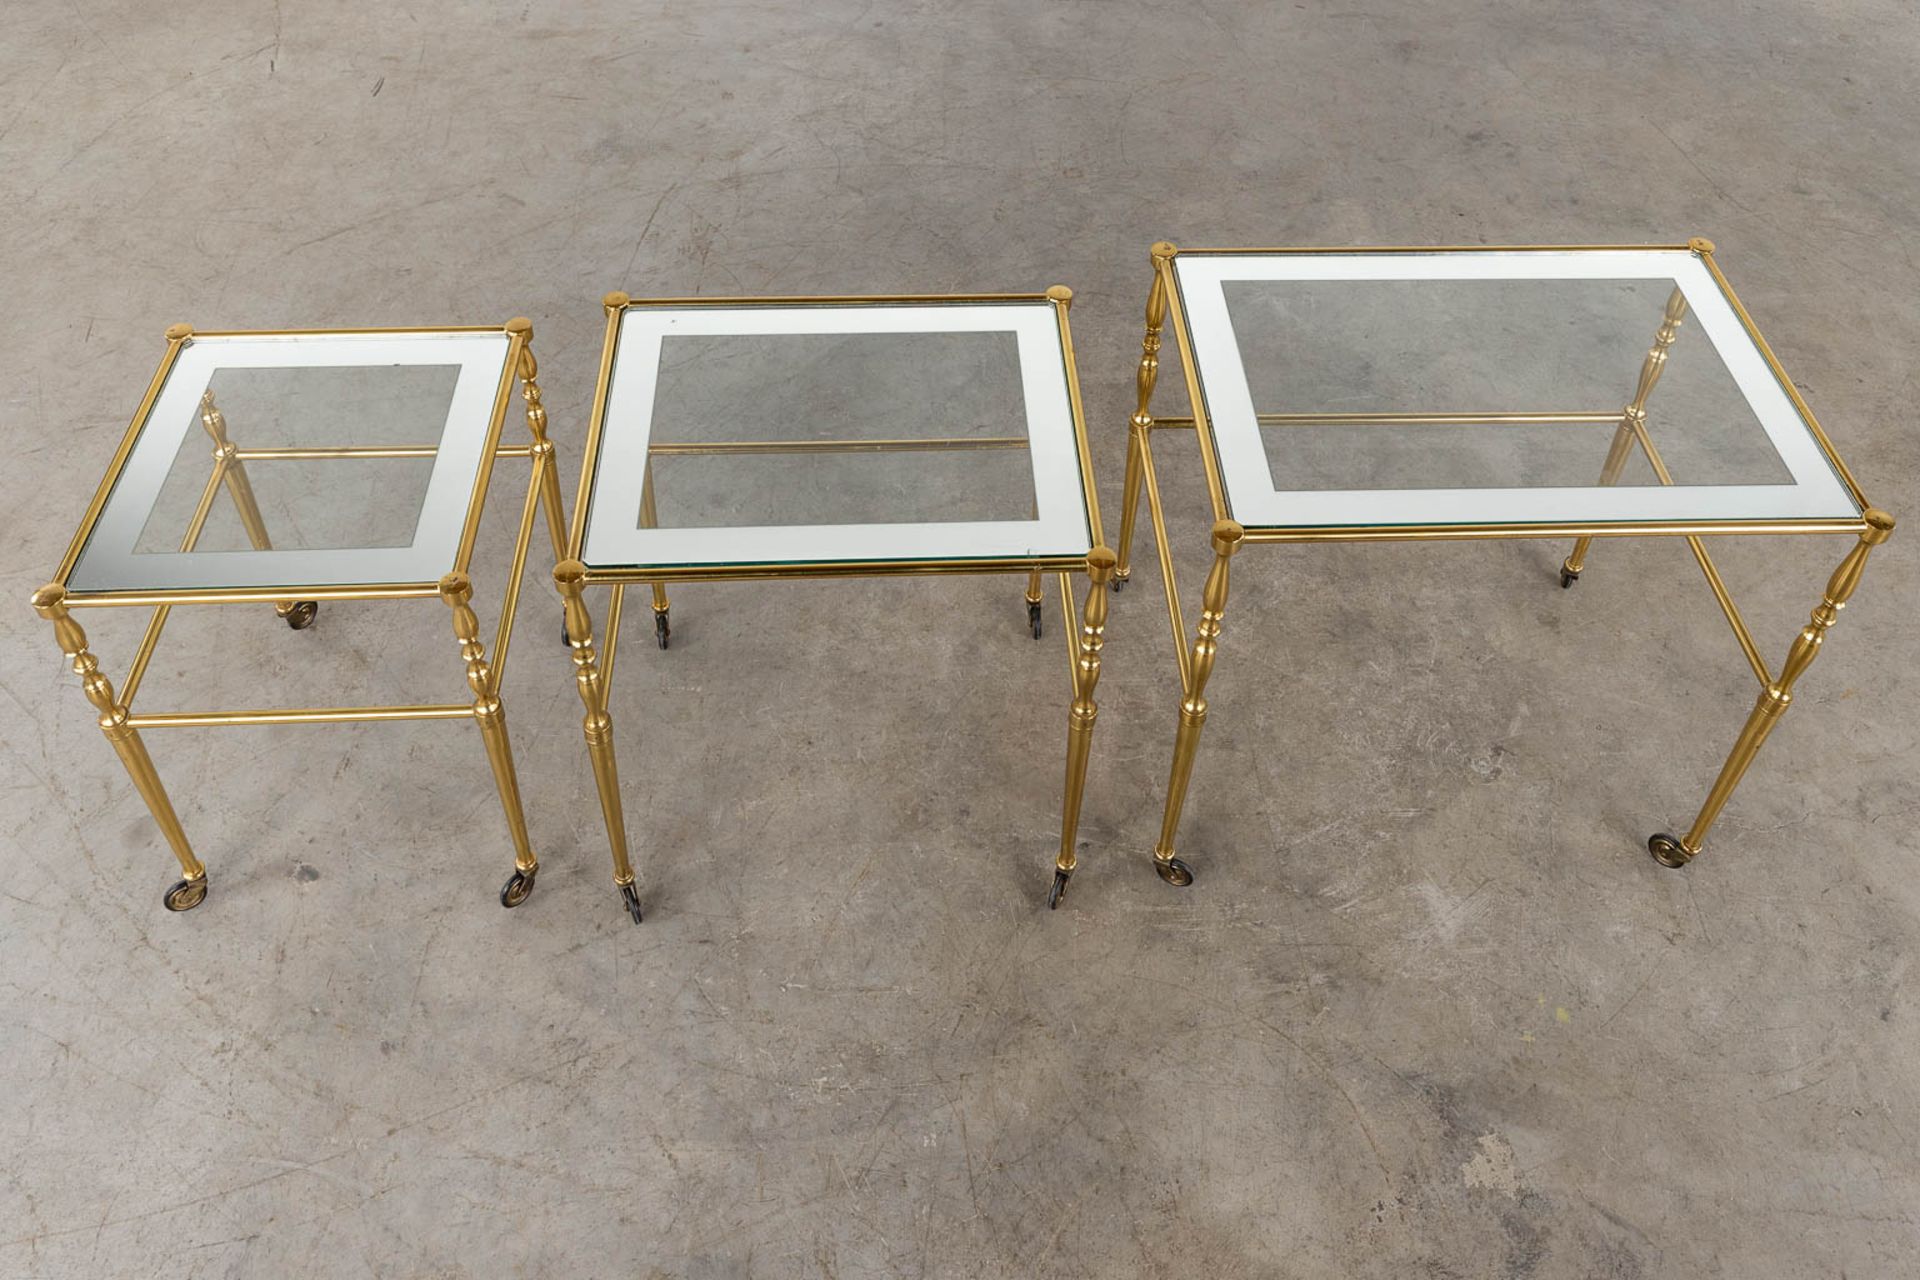 A set of nesting tables, brass and glass. 20th C. (D:39 x W:56 x H:52 cm) - Image 8 of 11